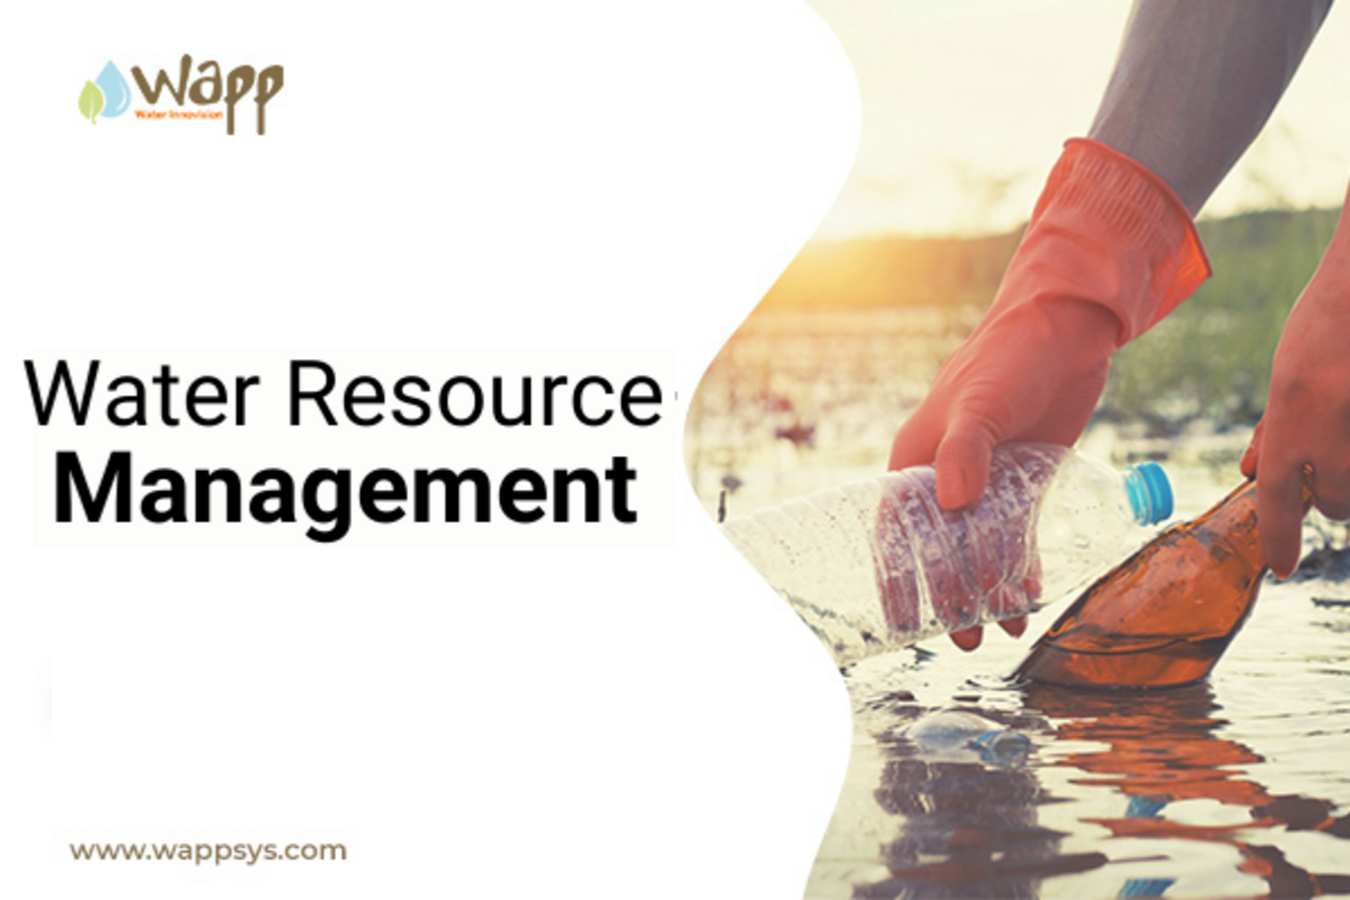 research proposal water resource management